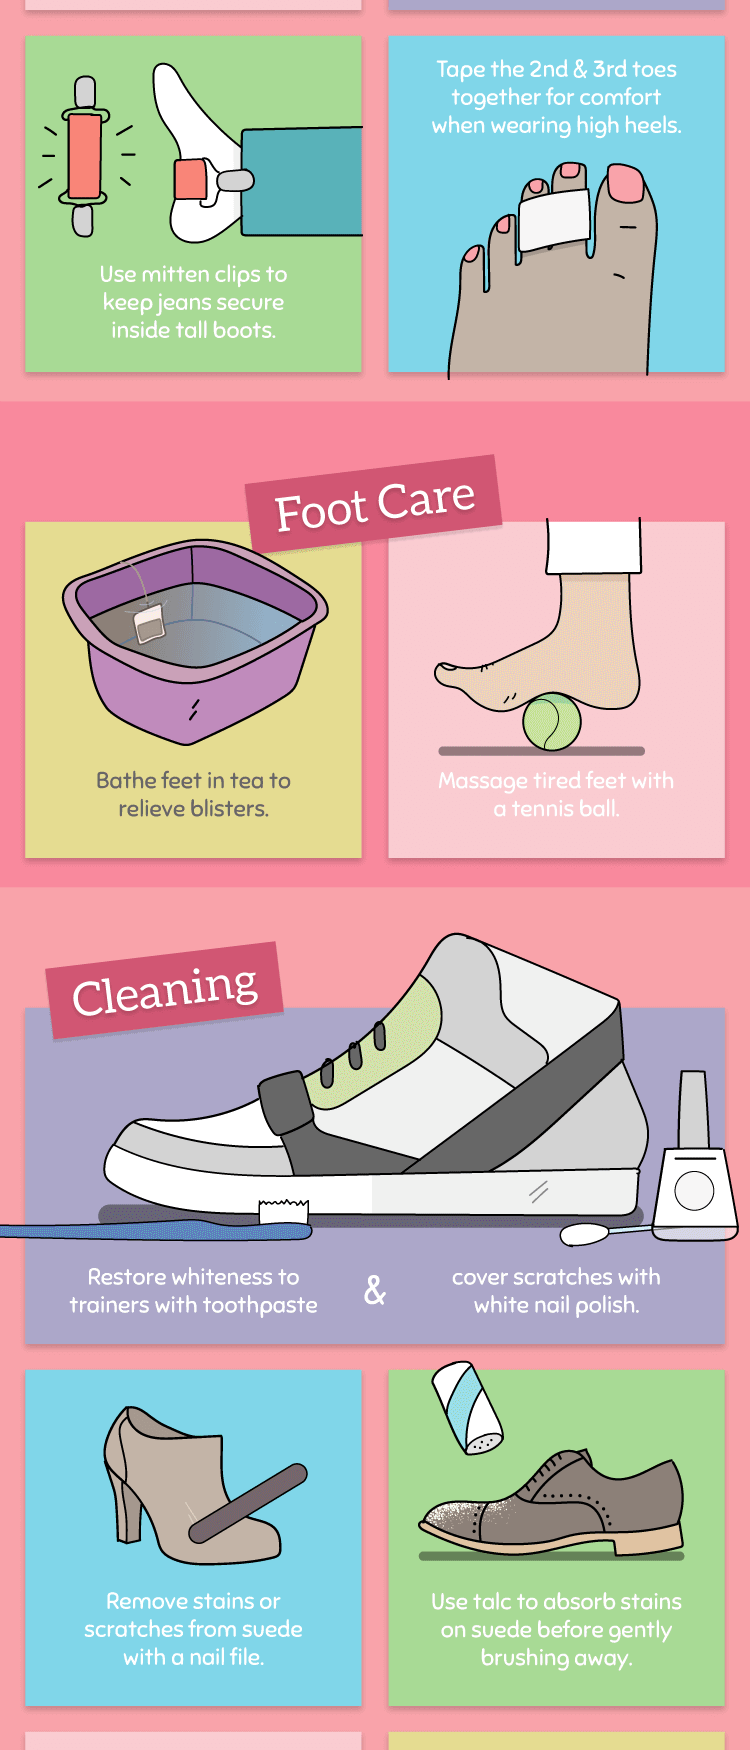  use heat and fluffy socks to strecth tight shoes 